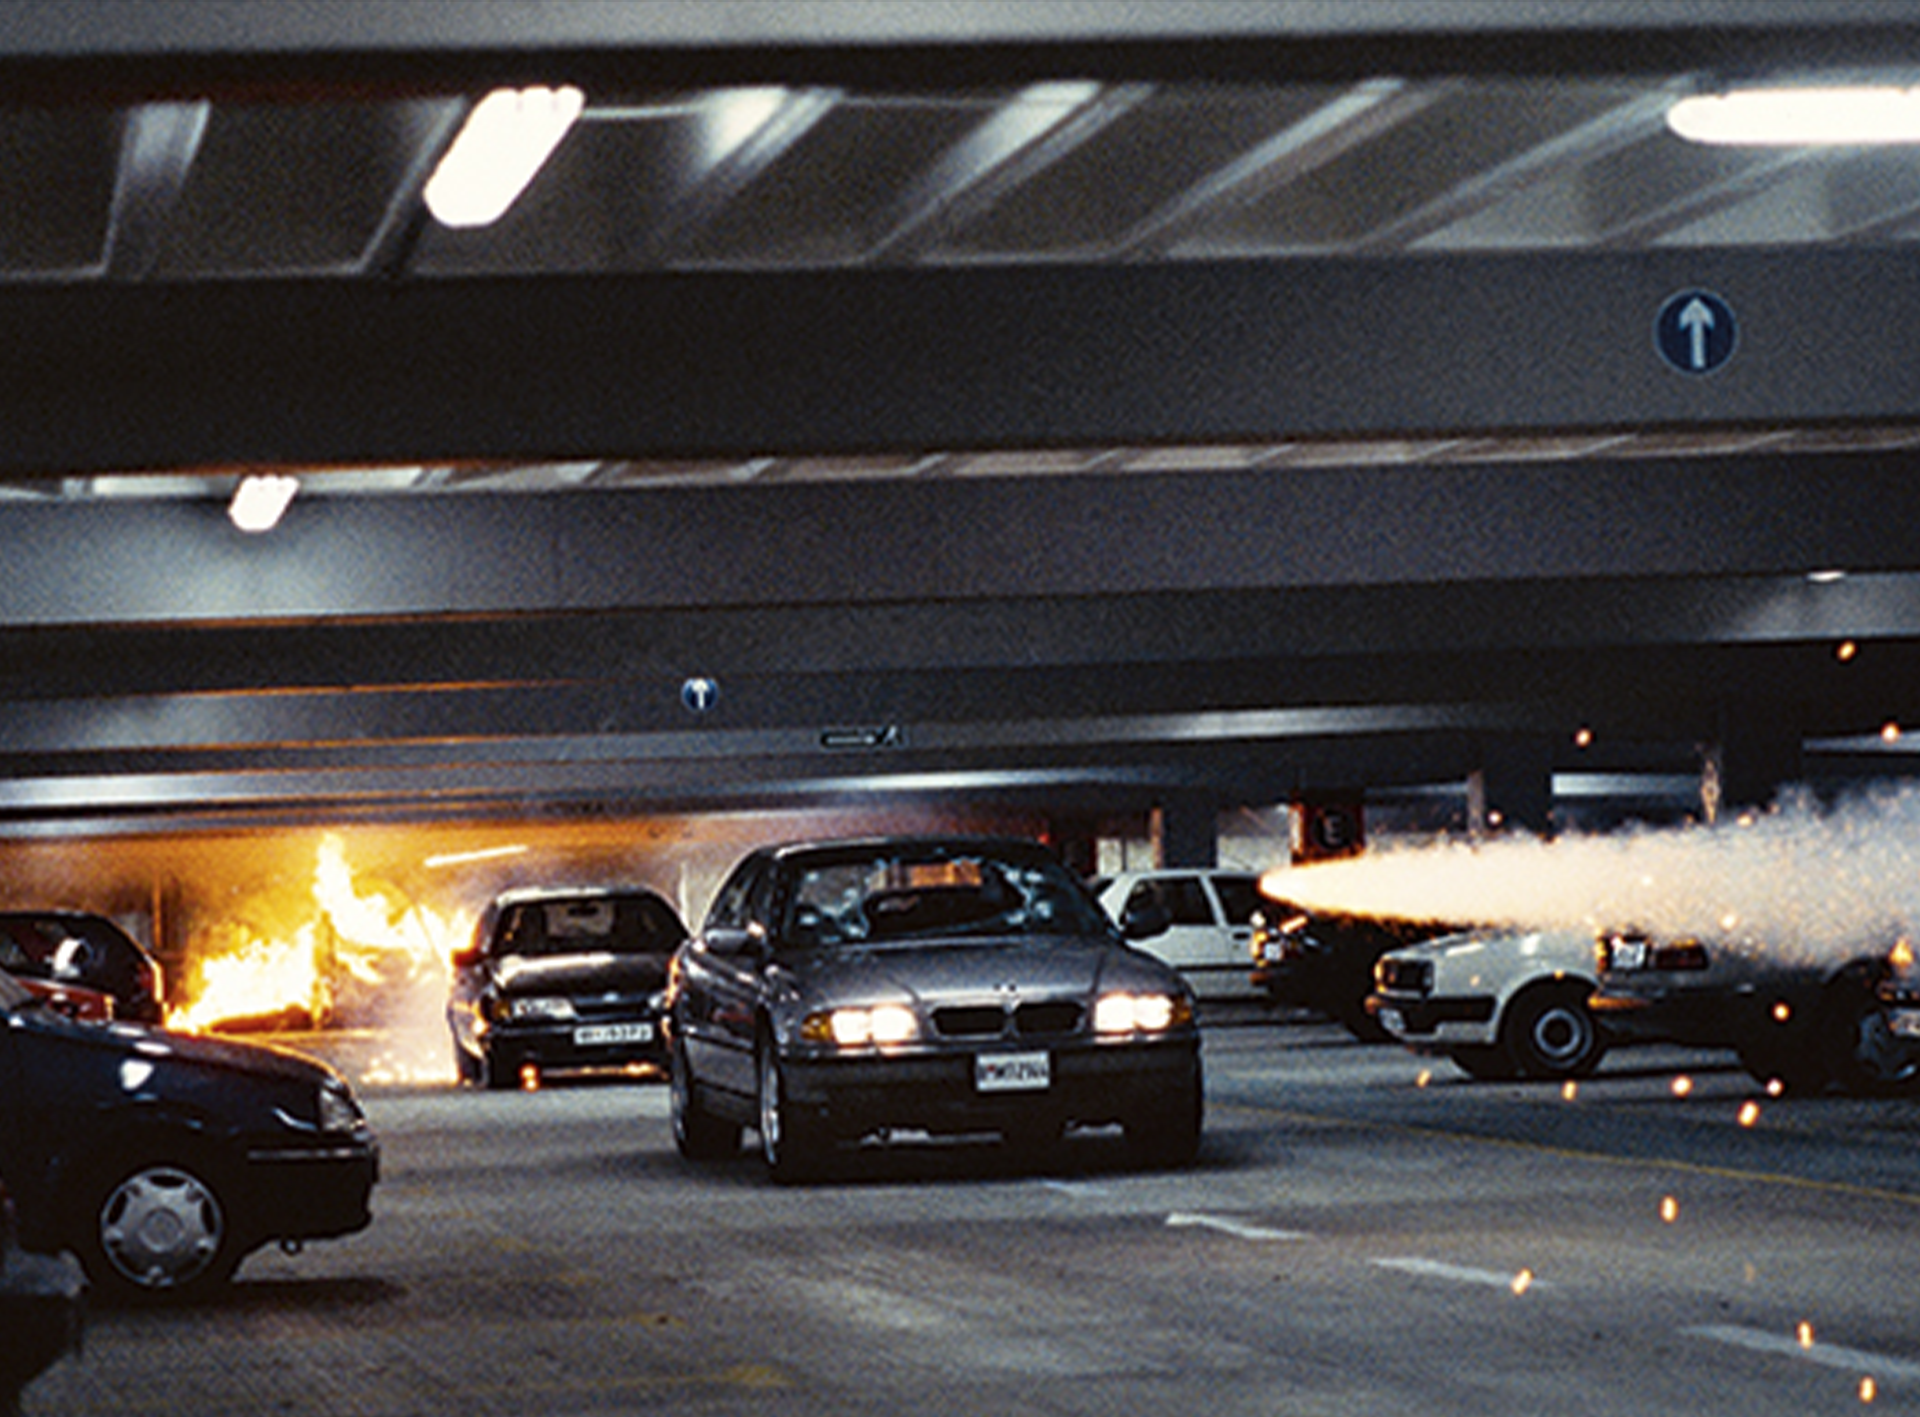 Focus Of The Week: <i>Tomorrow Never Dies</i> Car Chase